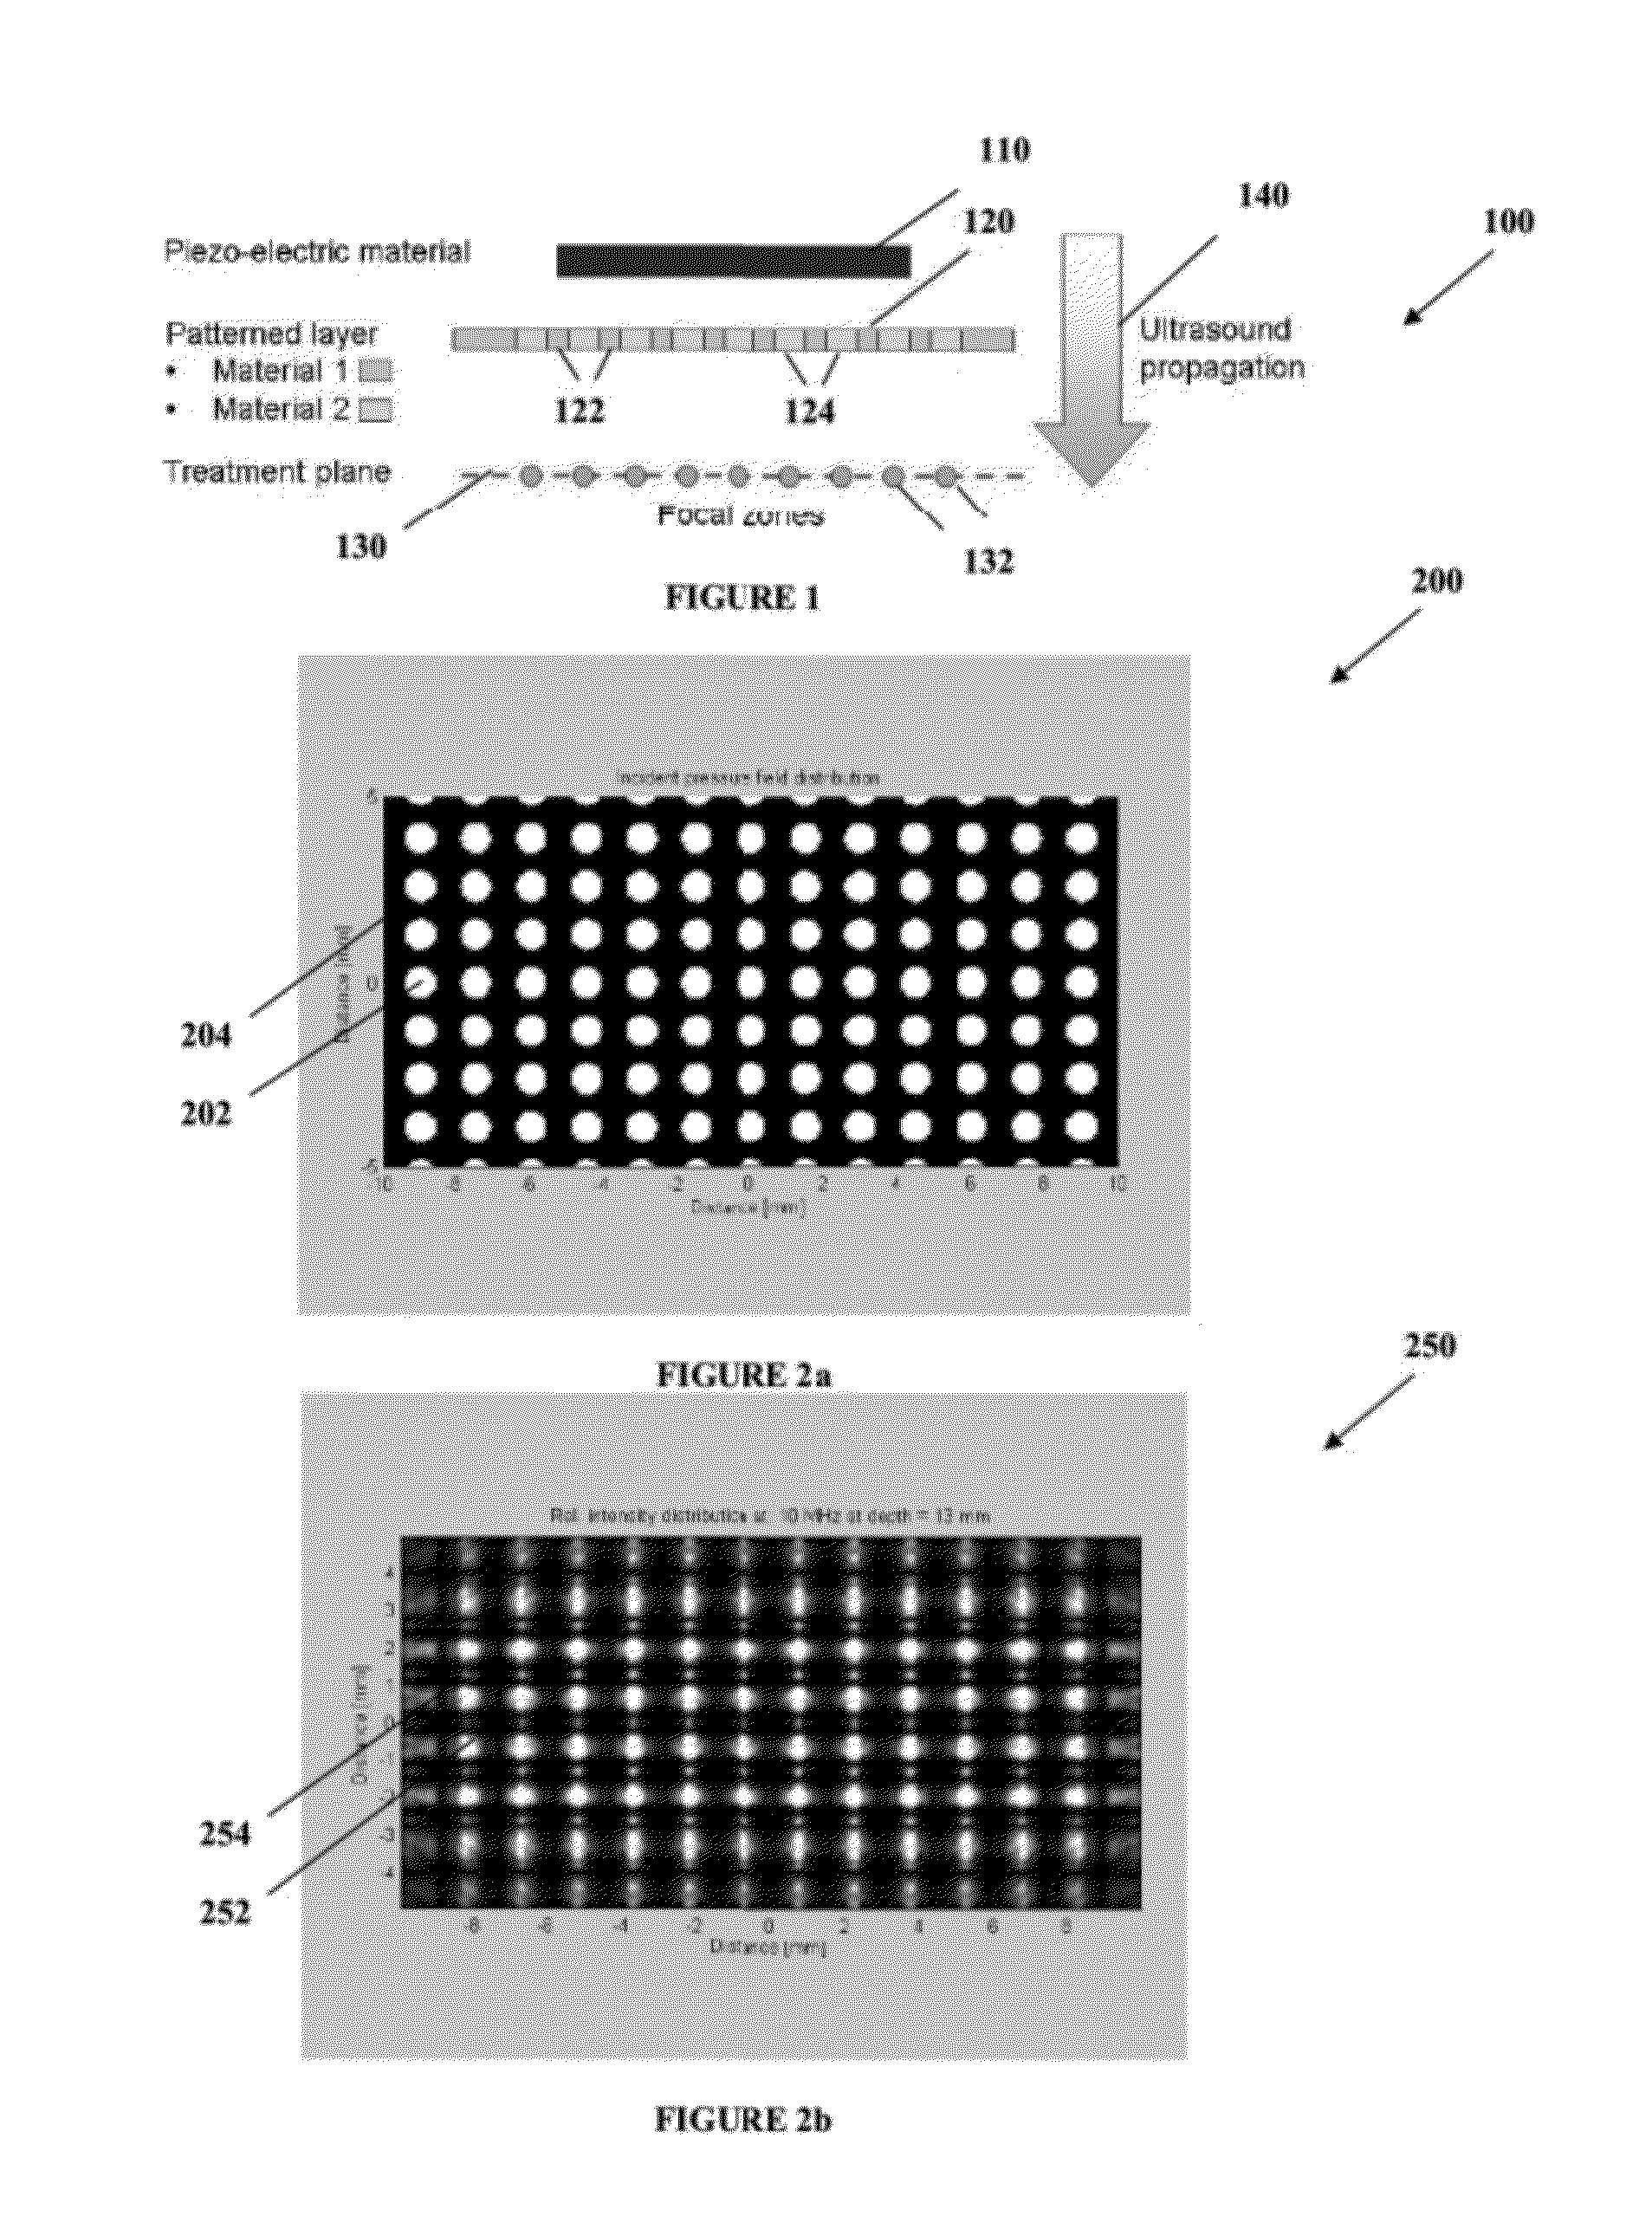 Ultrasonic therapy device with diffractive focusing